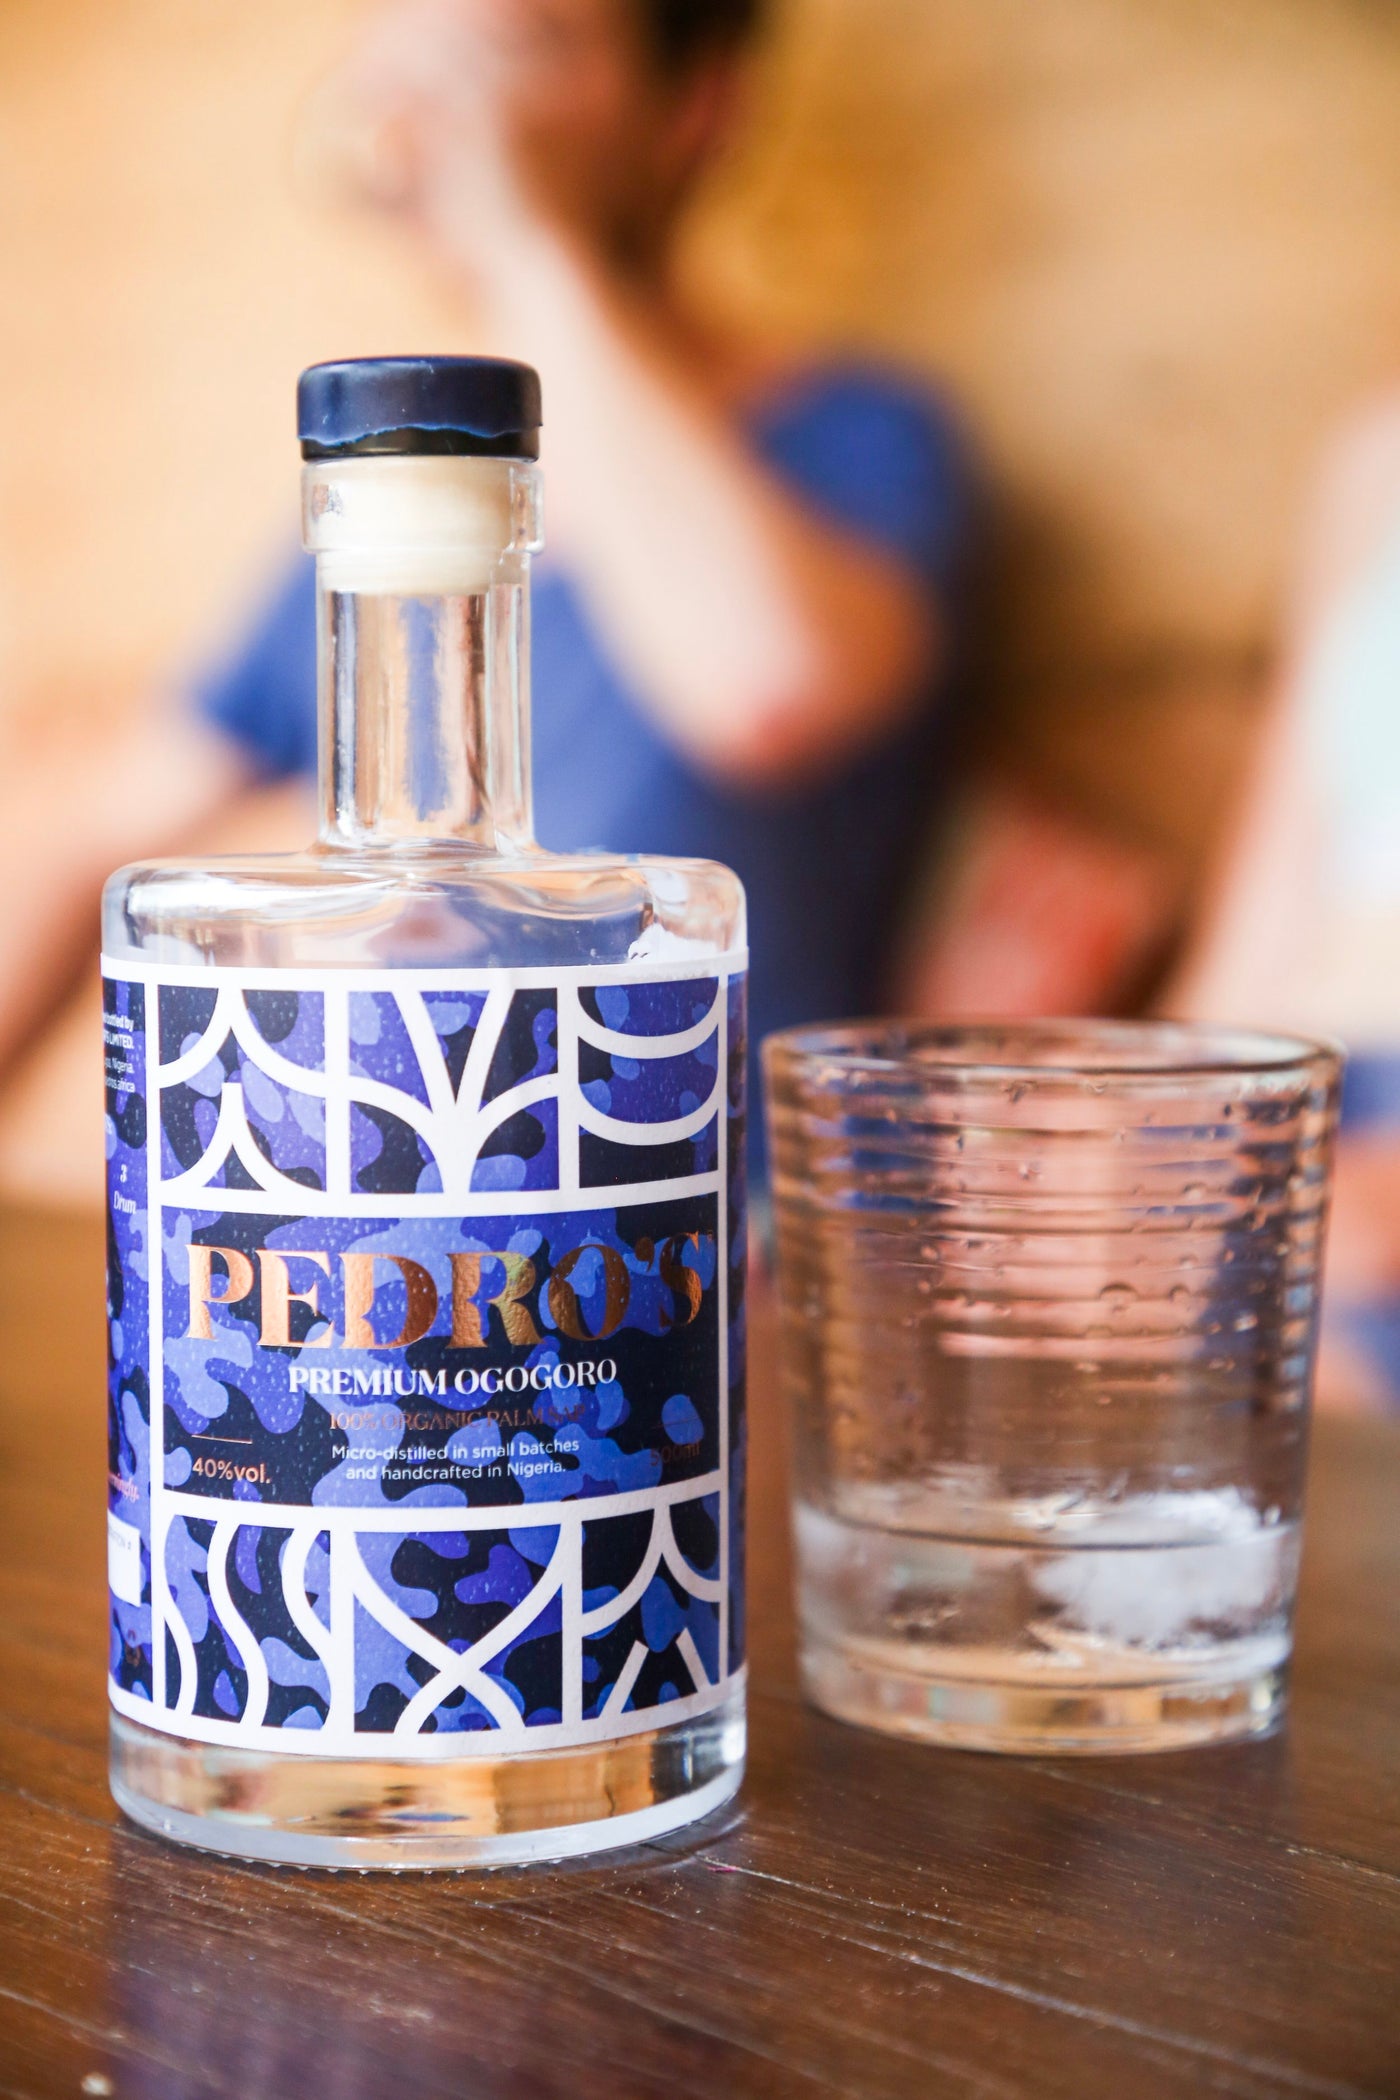 PEDRO'S - The First distilled "Ogogoro"